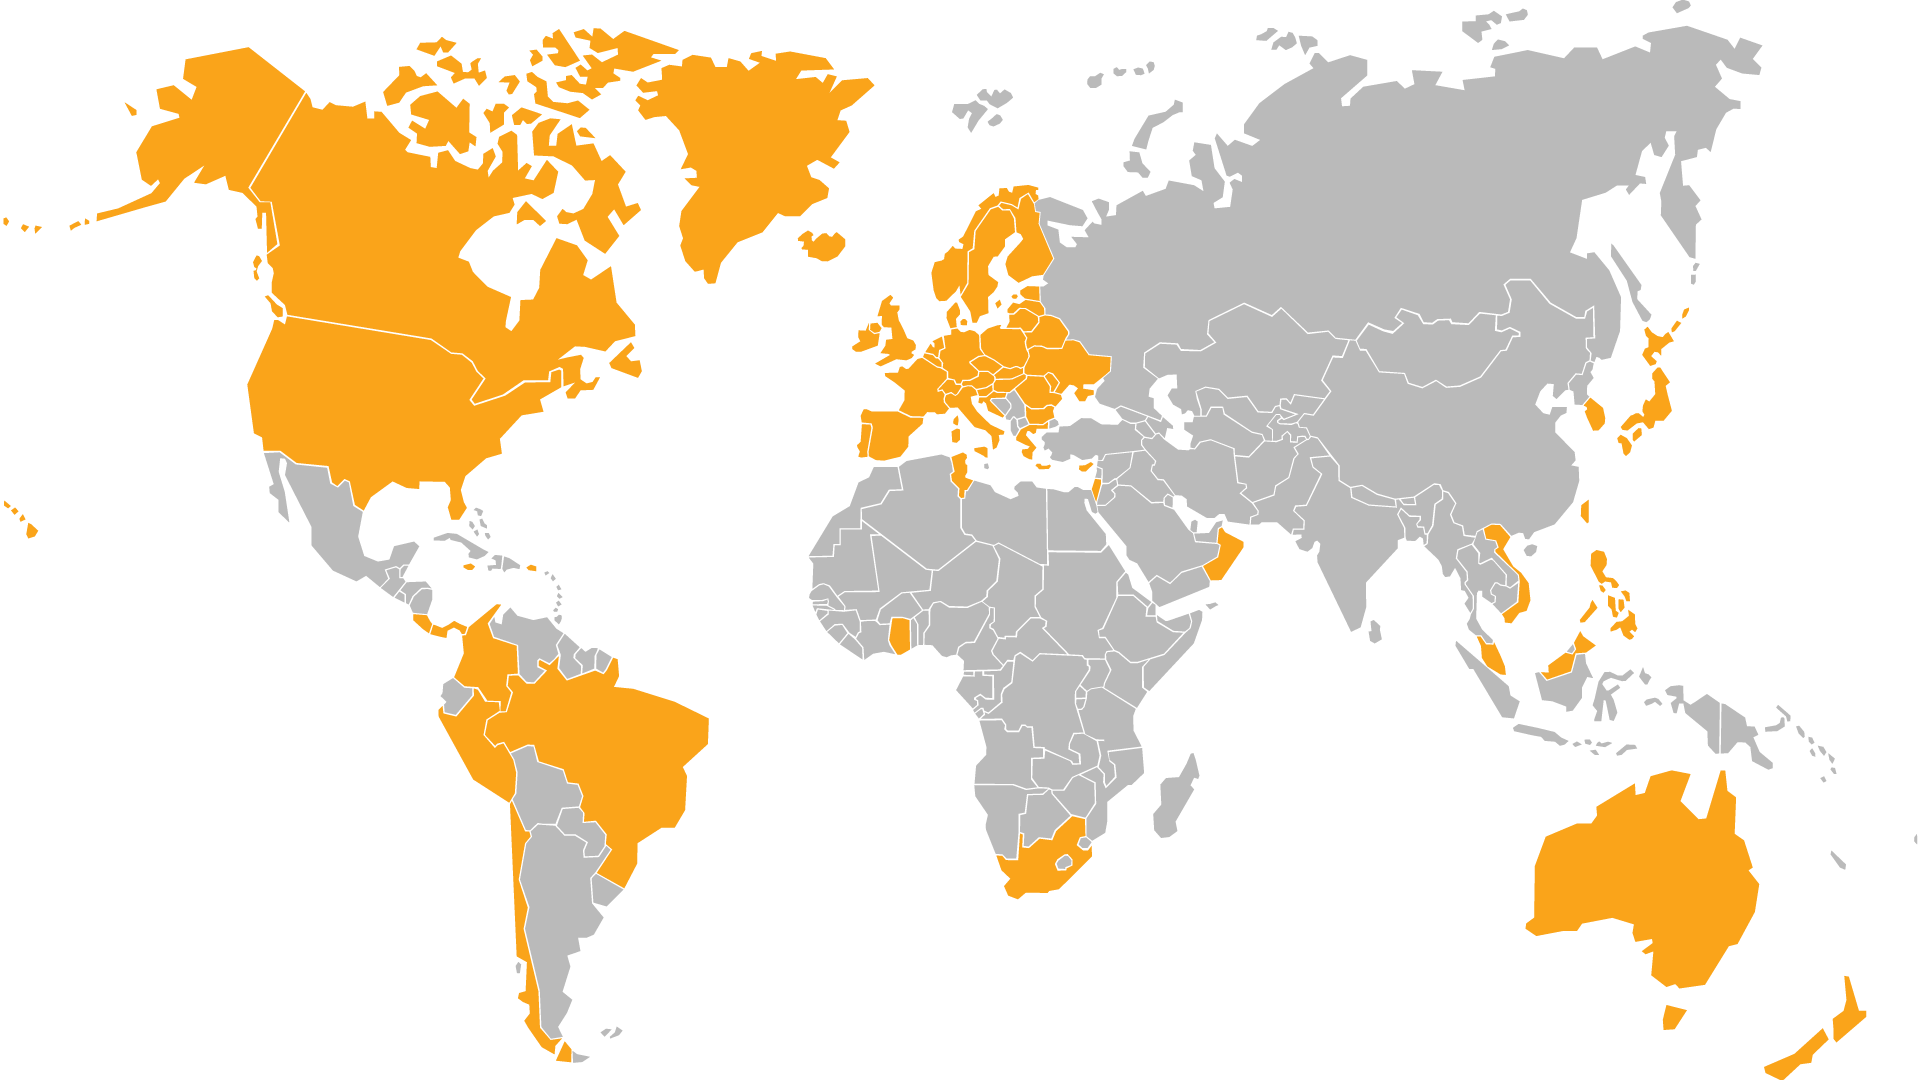 World map with countries that System76 ships to highlighted in yellow